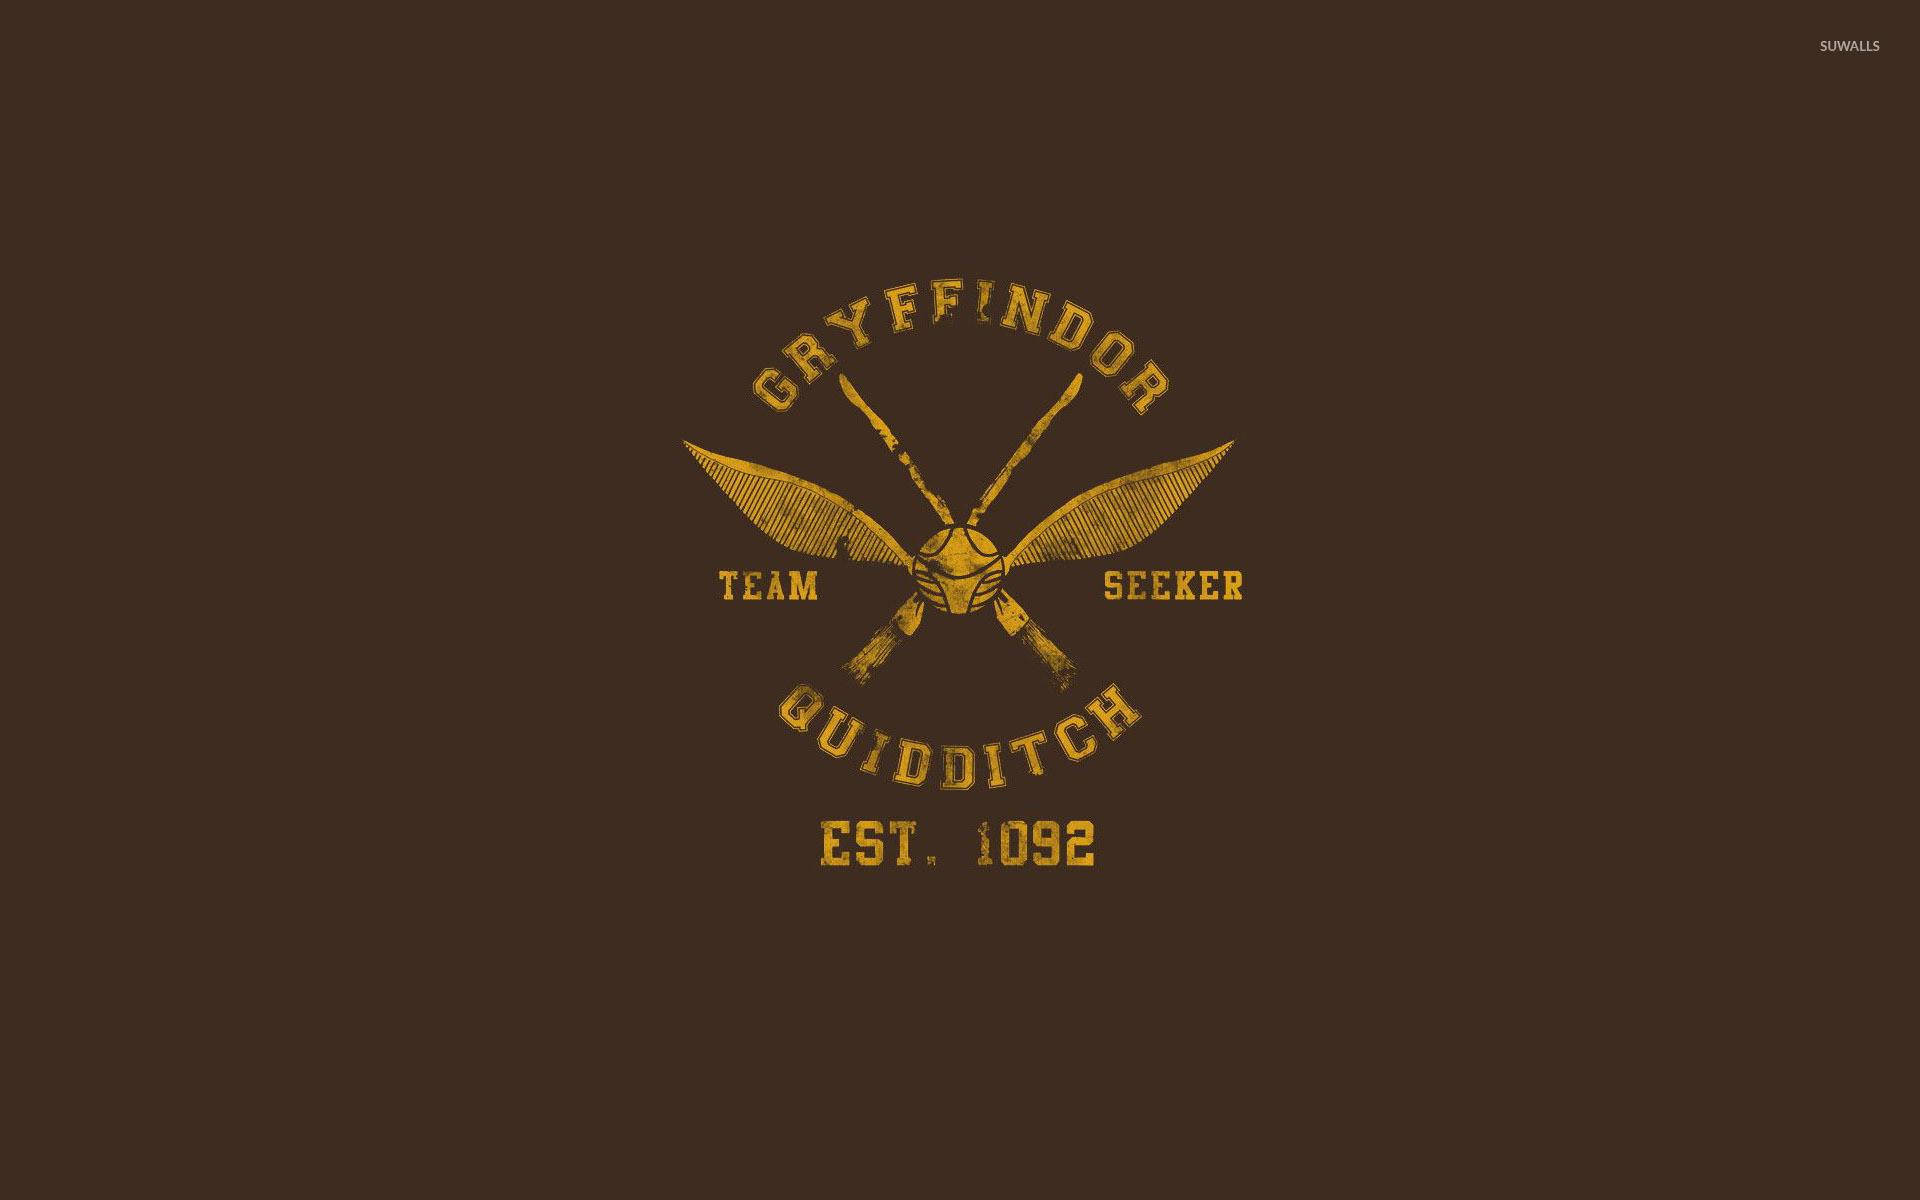 Aesthetic Harry Potter Gryffindor Quidditch